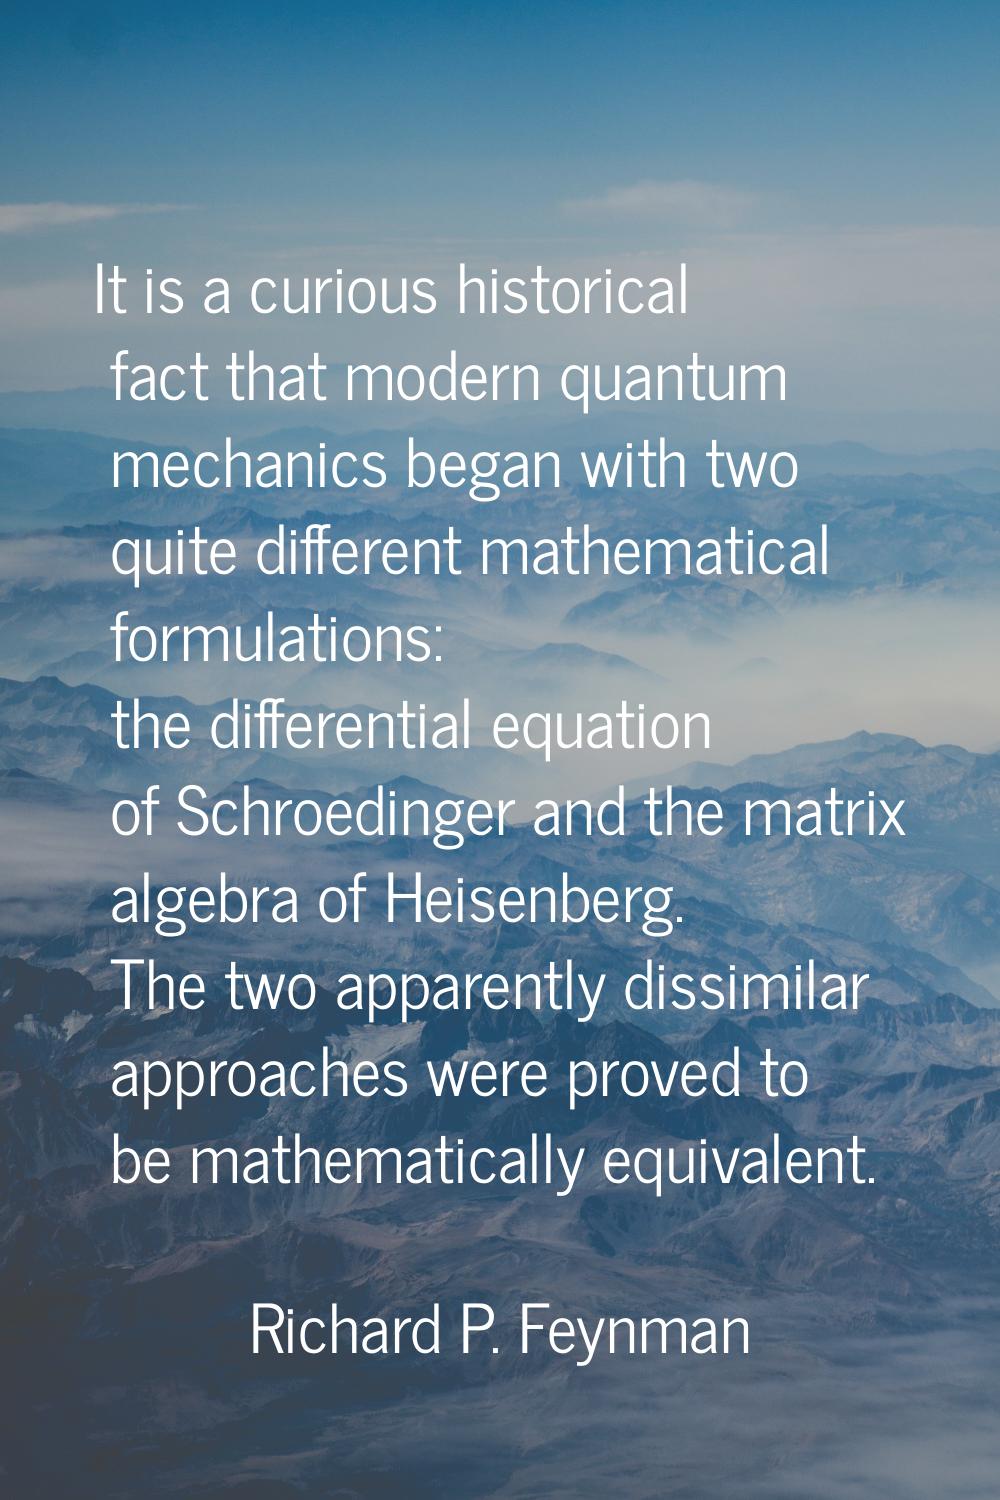 It is a curious historical fact that modern quantum mechanics began with two quite different mathem